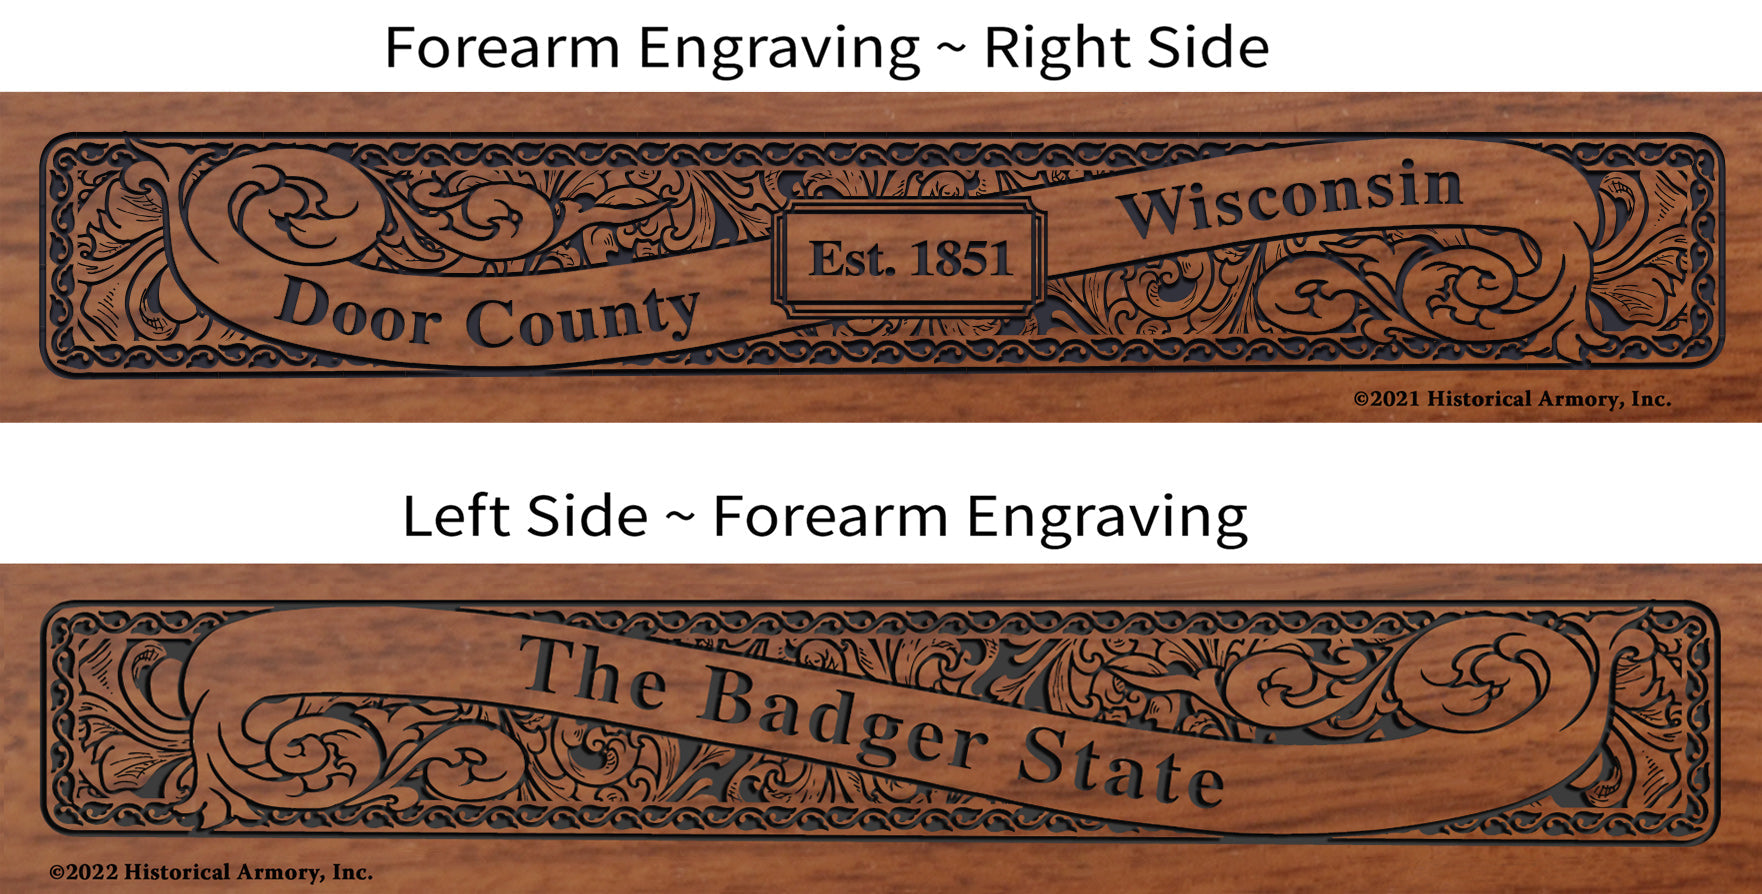 Door County Wisconsin Engraved Rifle Forearm